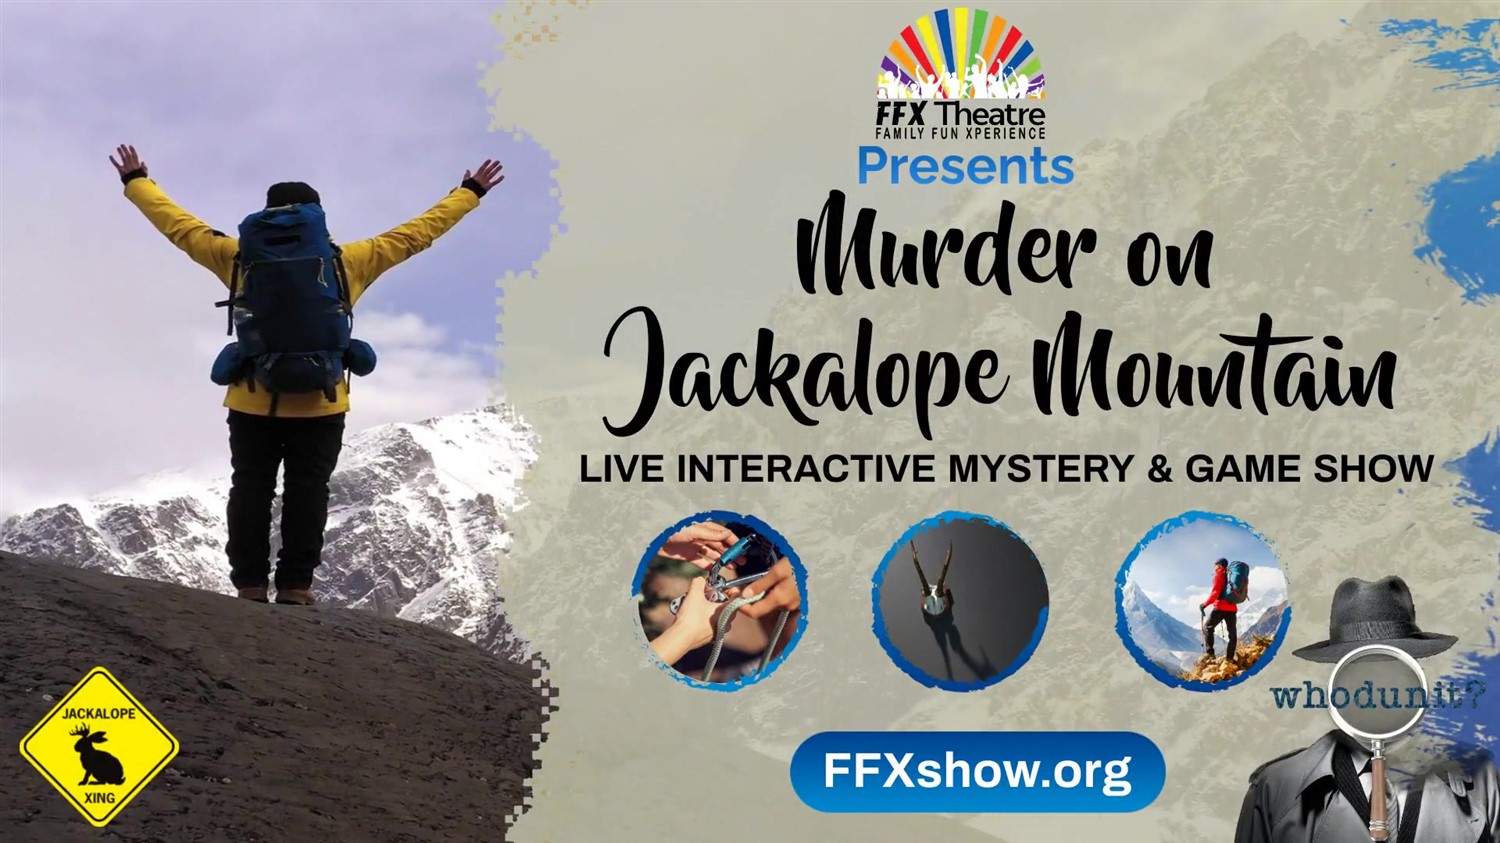 WhoDunIt? MURDER ON JACKALOPE MOUNTAIN Mystery + Game Show on Jun 01, 19:00@FFX Theatre - Pick a seat, Buy tickets and Get information on Family Fun Xperience tickets.ffxshow.org